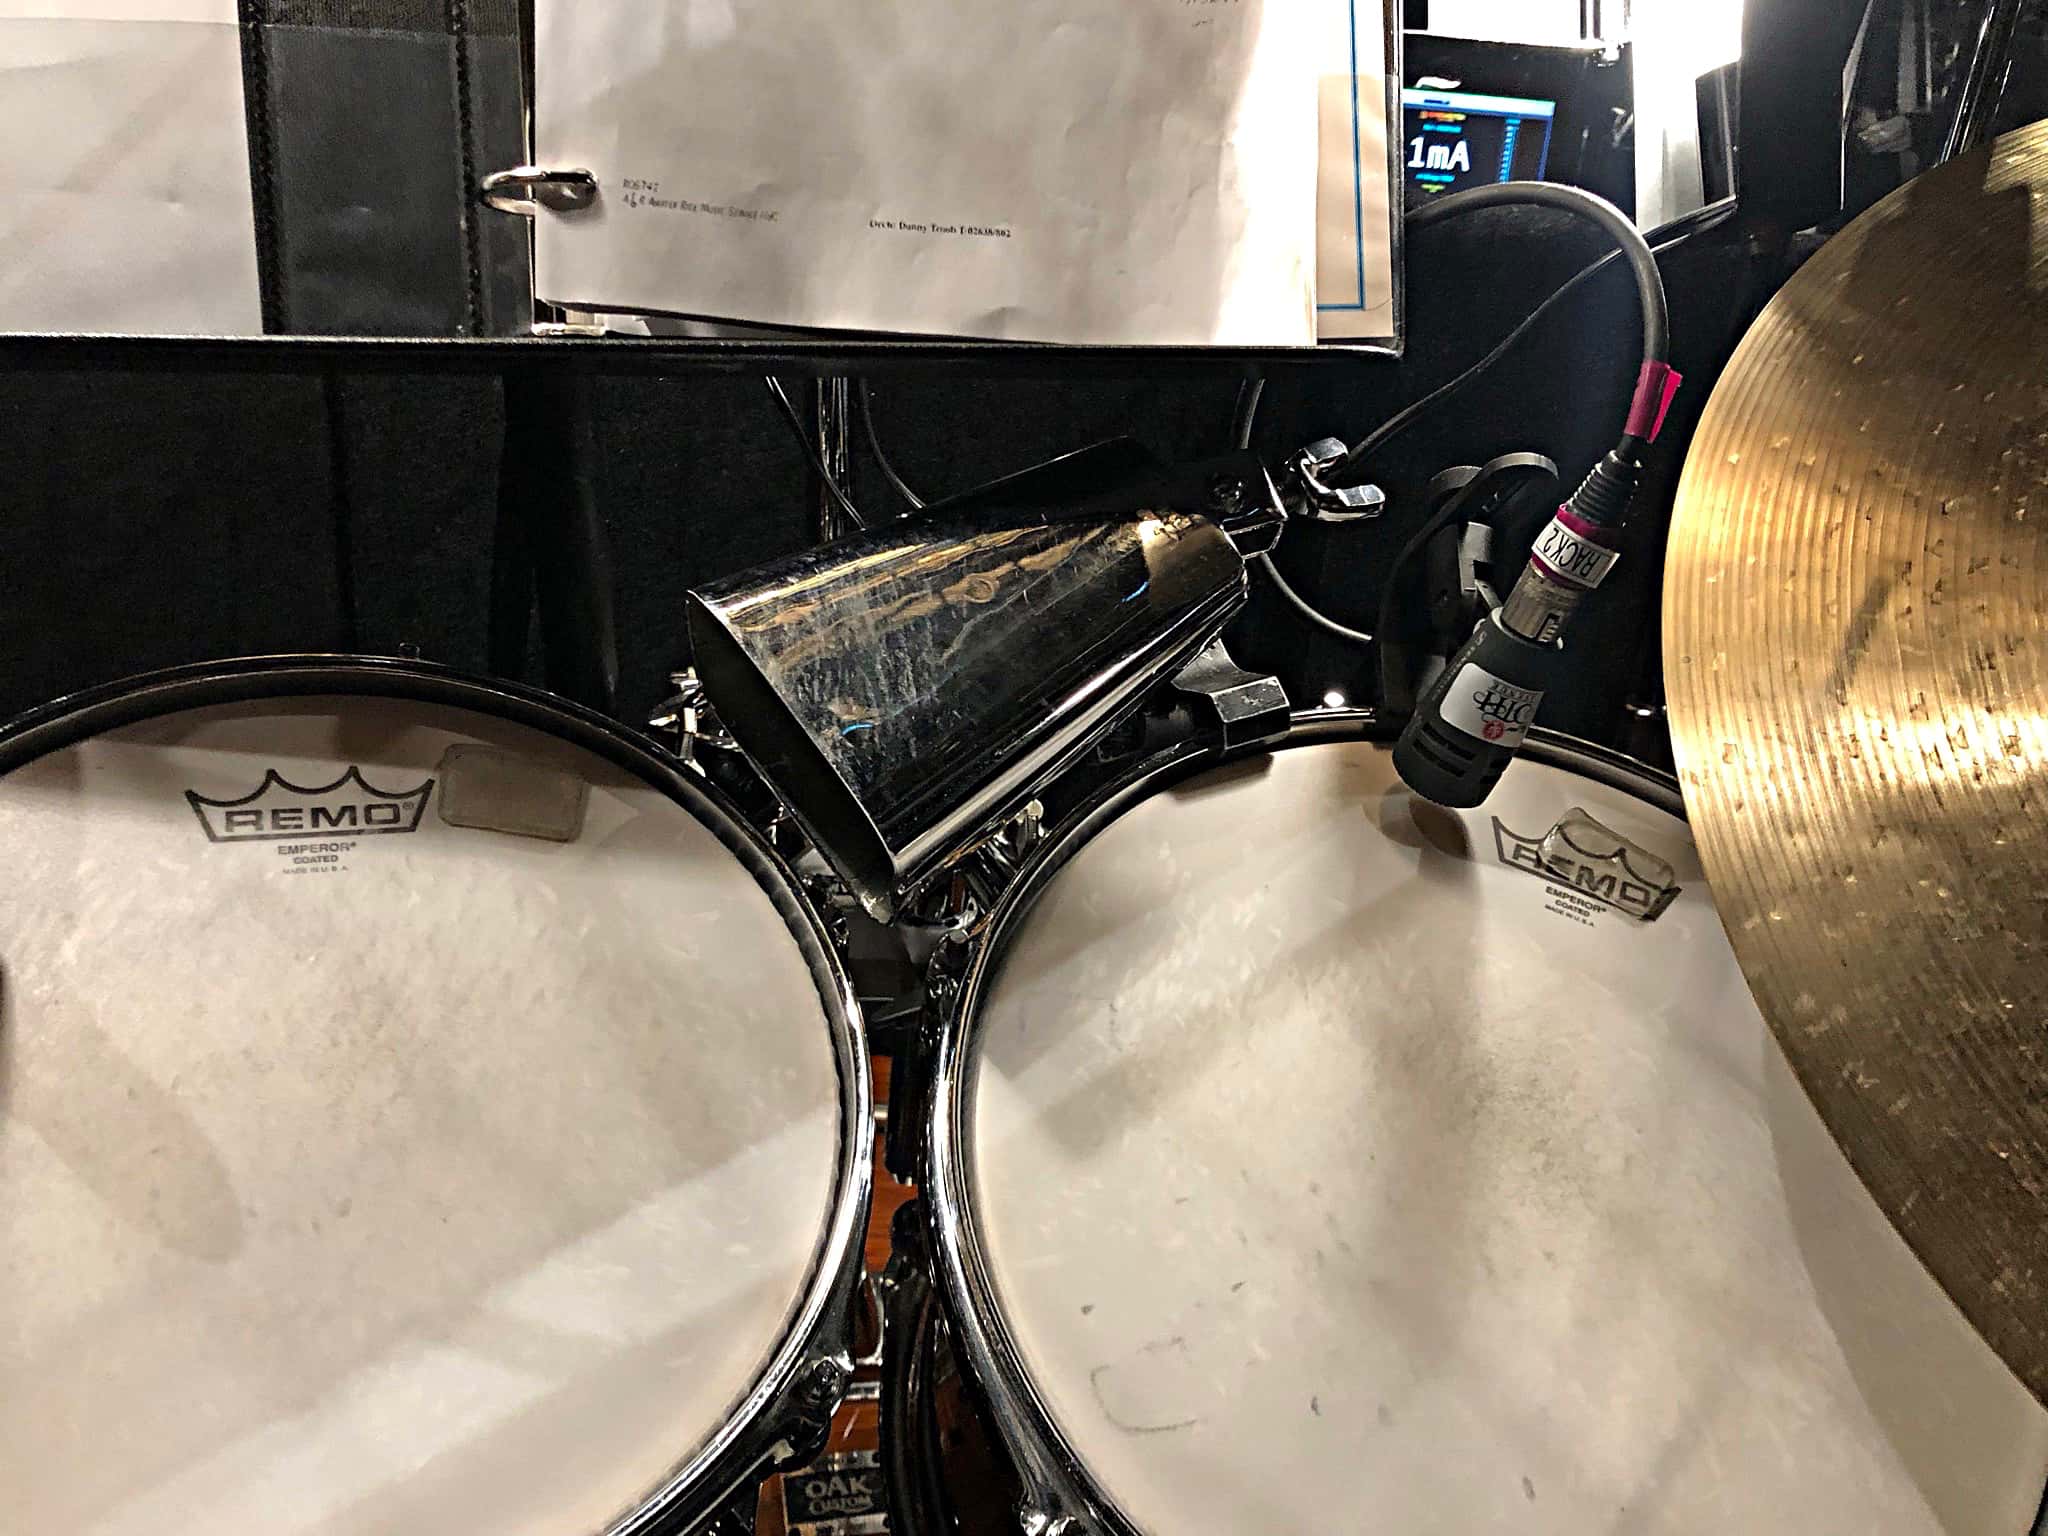 Alec Wilmart's drum set setup for The Little Mermaid at the 5th Avenue Theatre in Seattle, Washington.